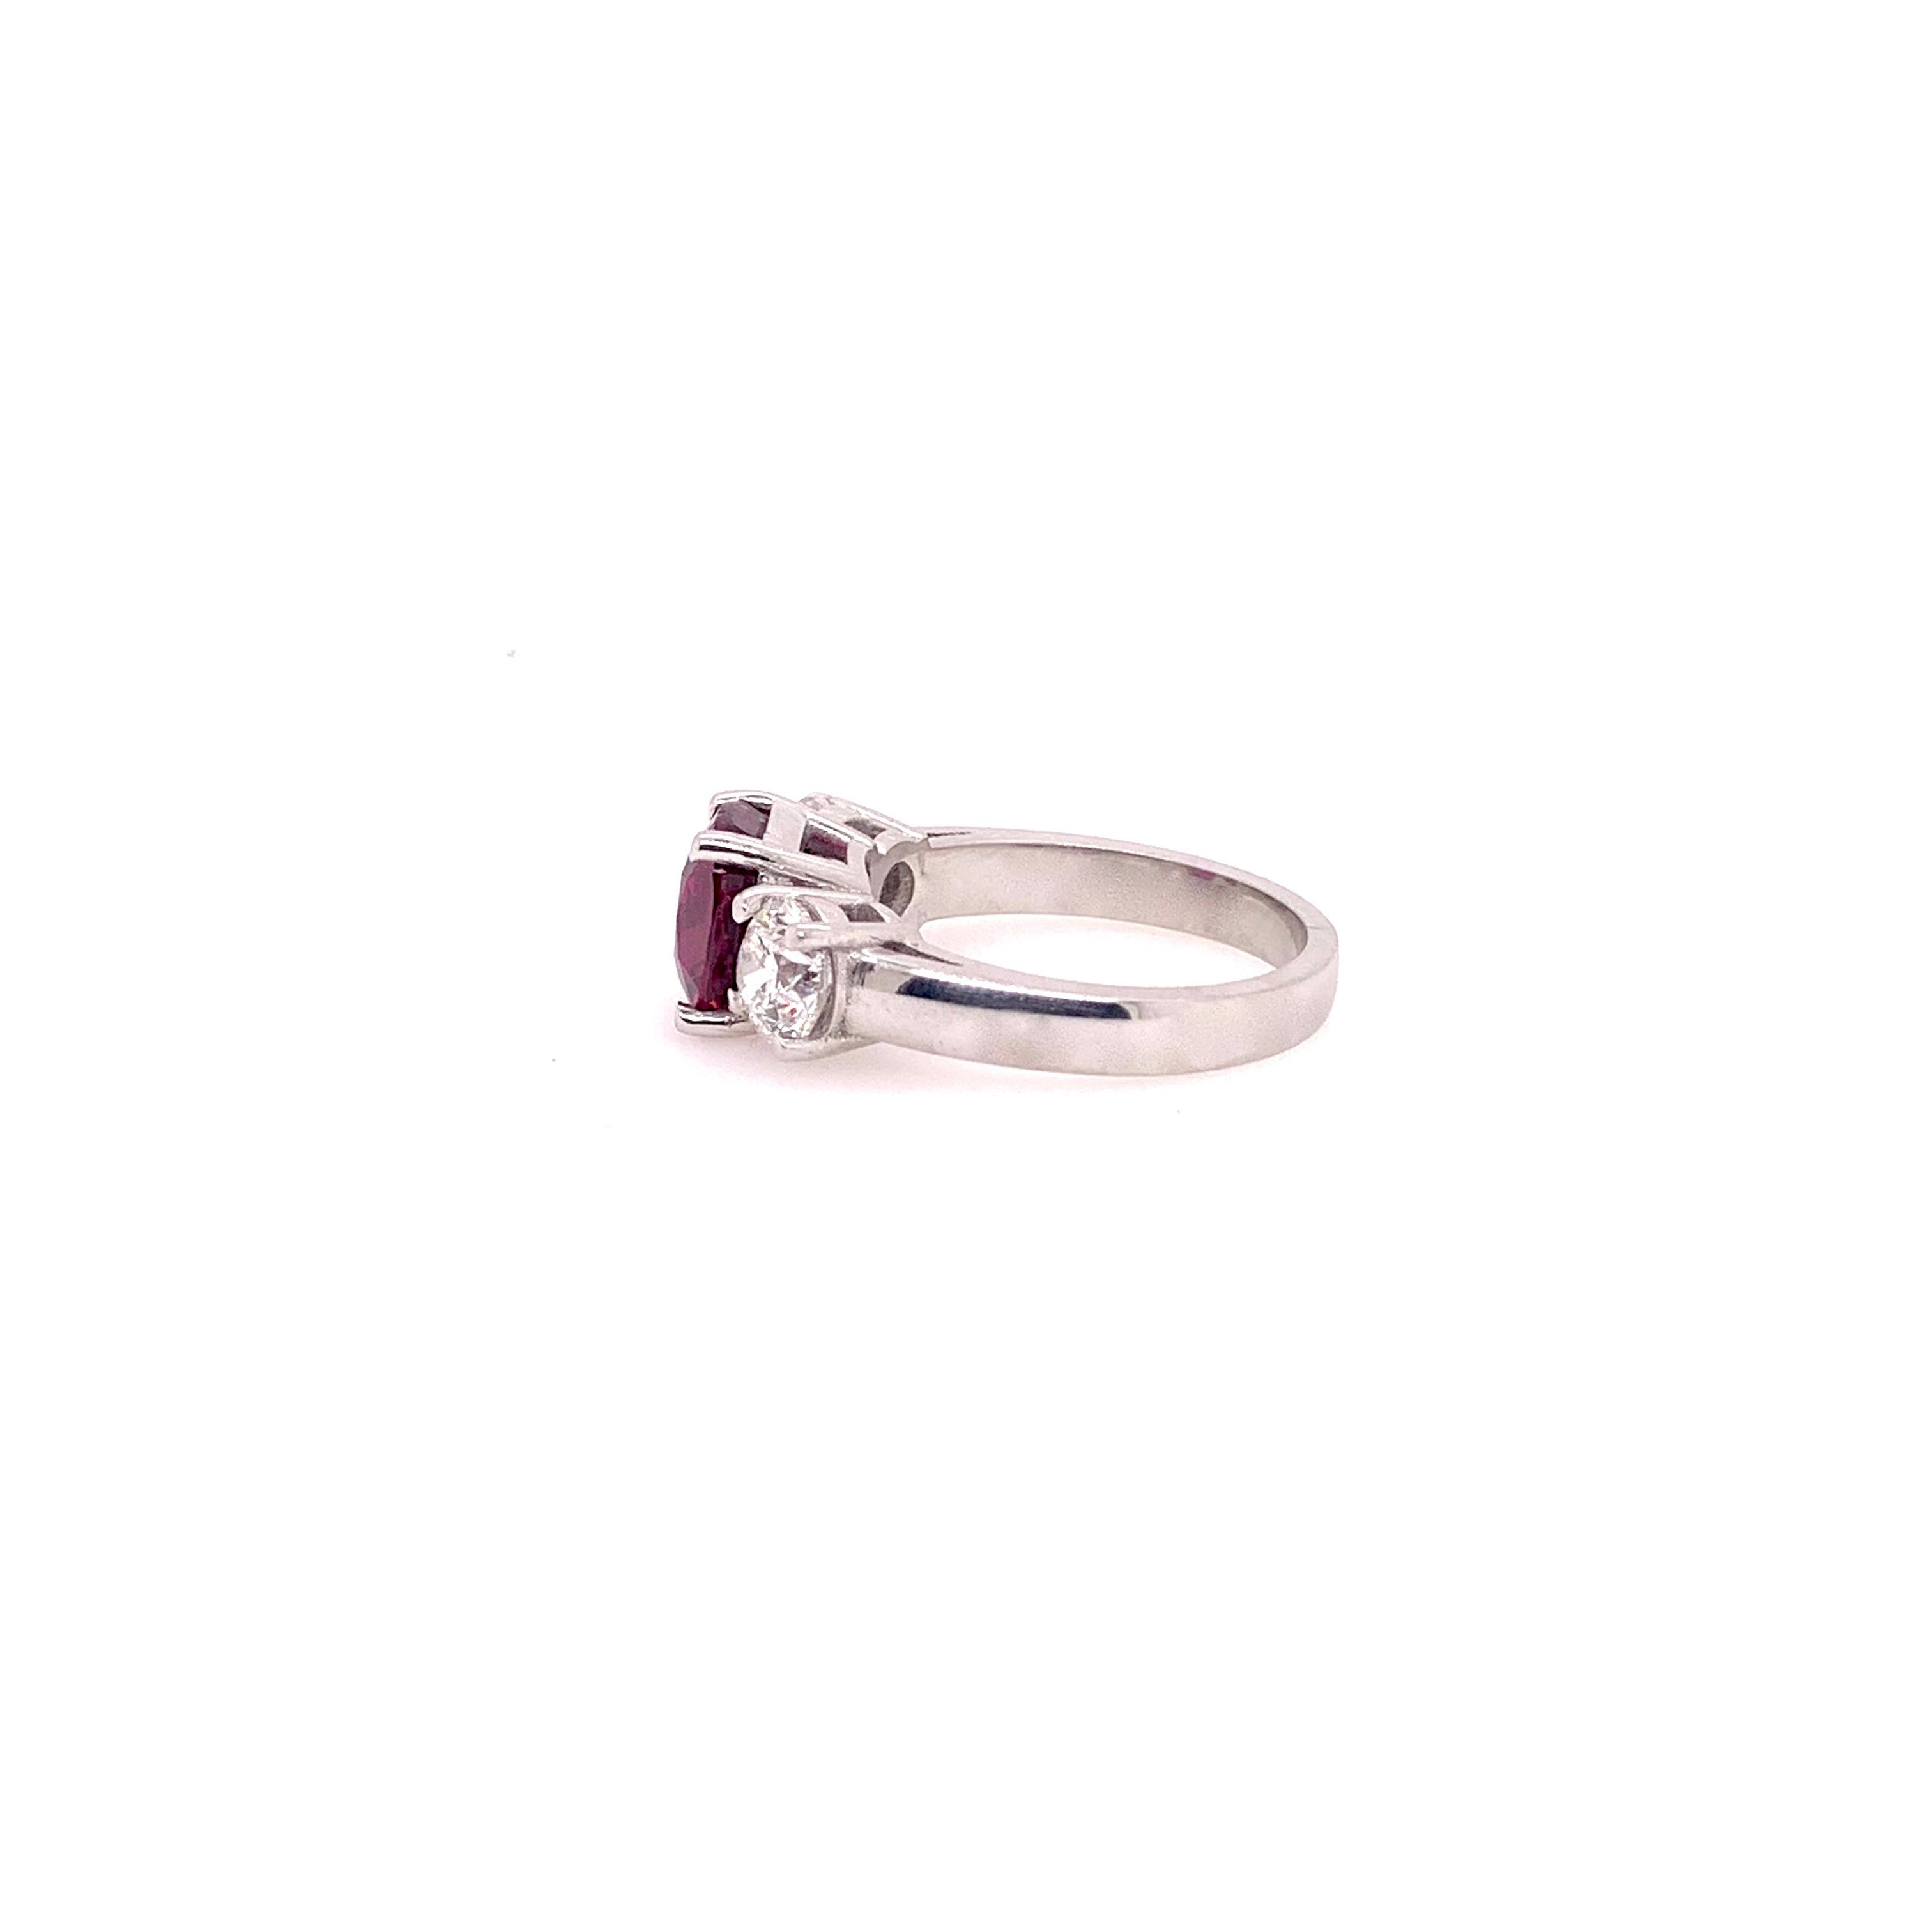 This handmade platinum setting showcases a stunning GIA certified, unheated cushion cut ruby that weighs 2.99 carats.  It is placed in between two GIA certified round brilliant diamonds, totaling 1.4 carats total weight with E color, VS2 clarity and